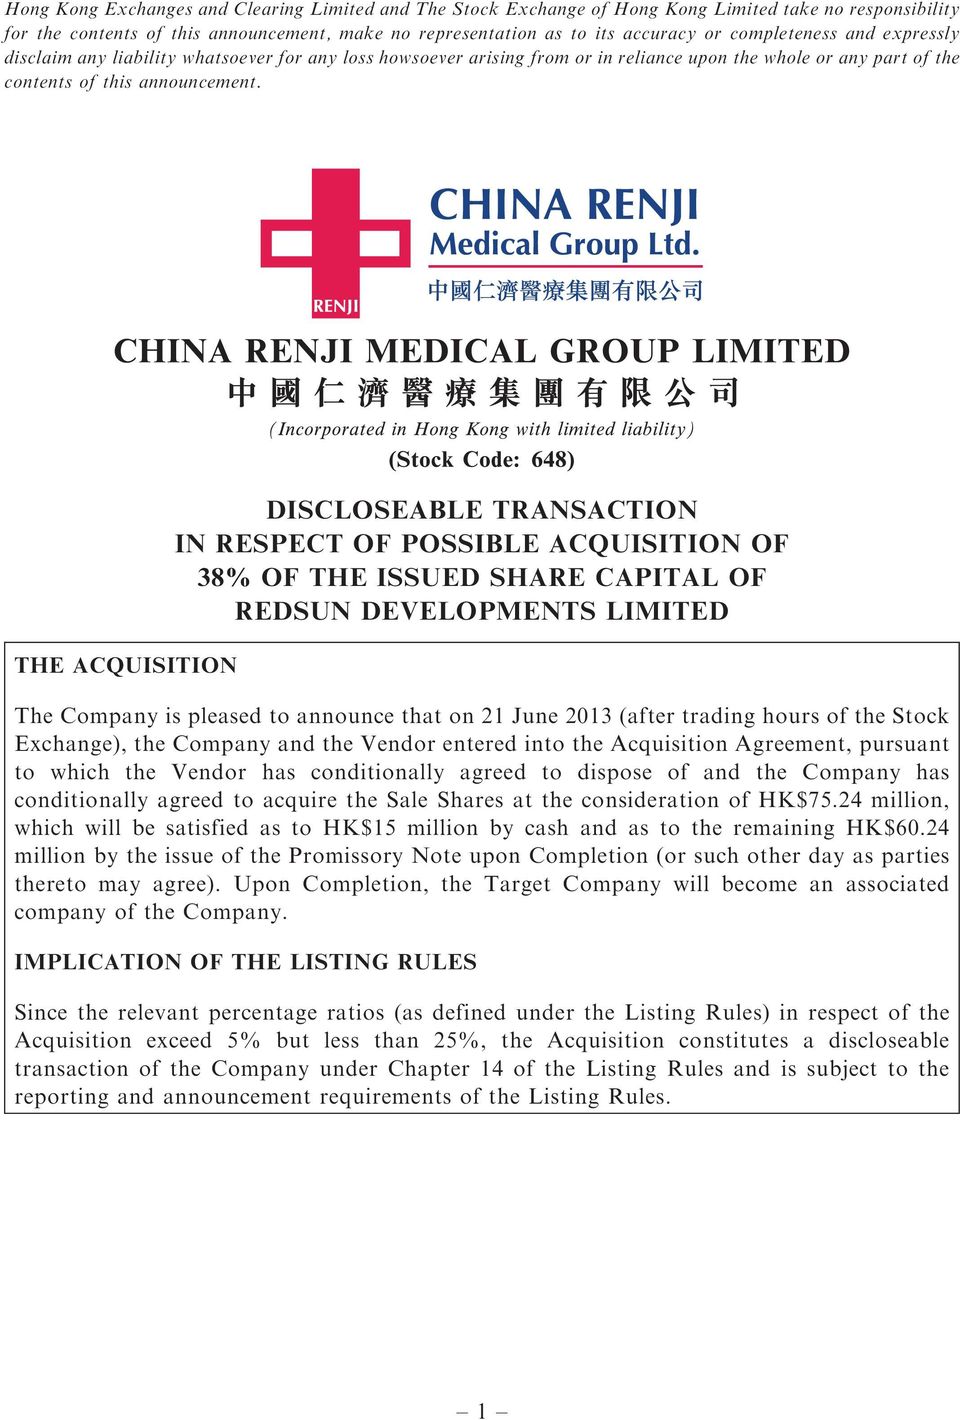 THE ACQUISITION DISCLOSEABLE TRANSACTION IN RESPECT OF POSSIBLE ACQUISITION OF 38% OF THE ISSUED SHARE CAPITAL OF REDSUN DEVELOPMENTS LIMITED The Company is pleased to announce that on 21 June 2013